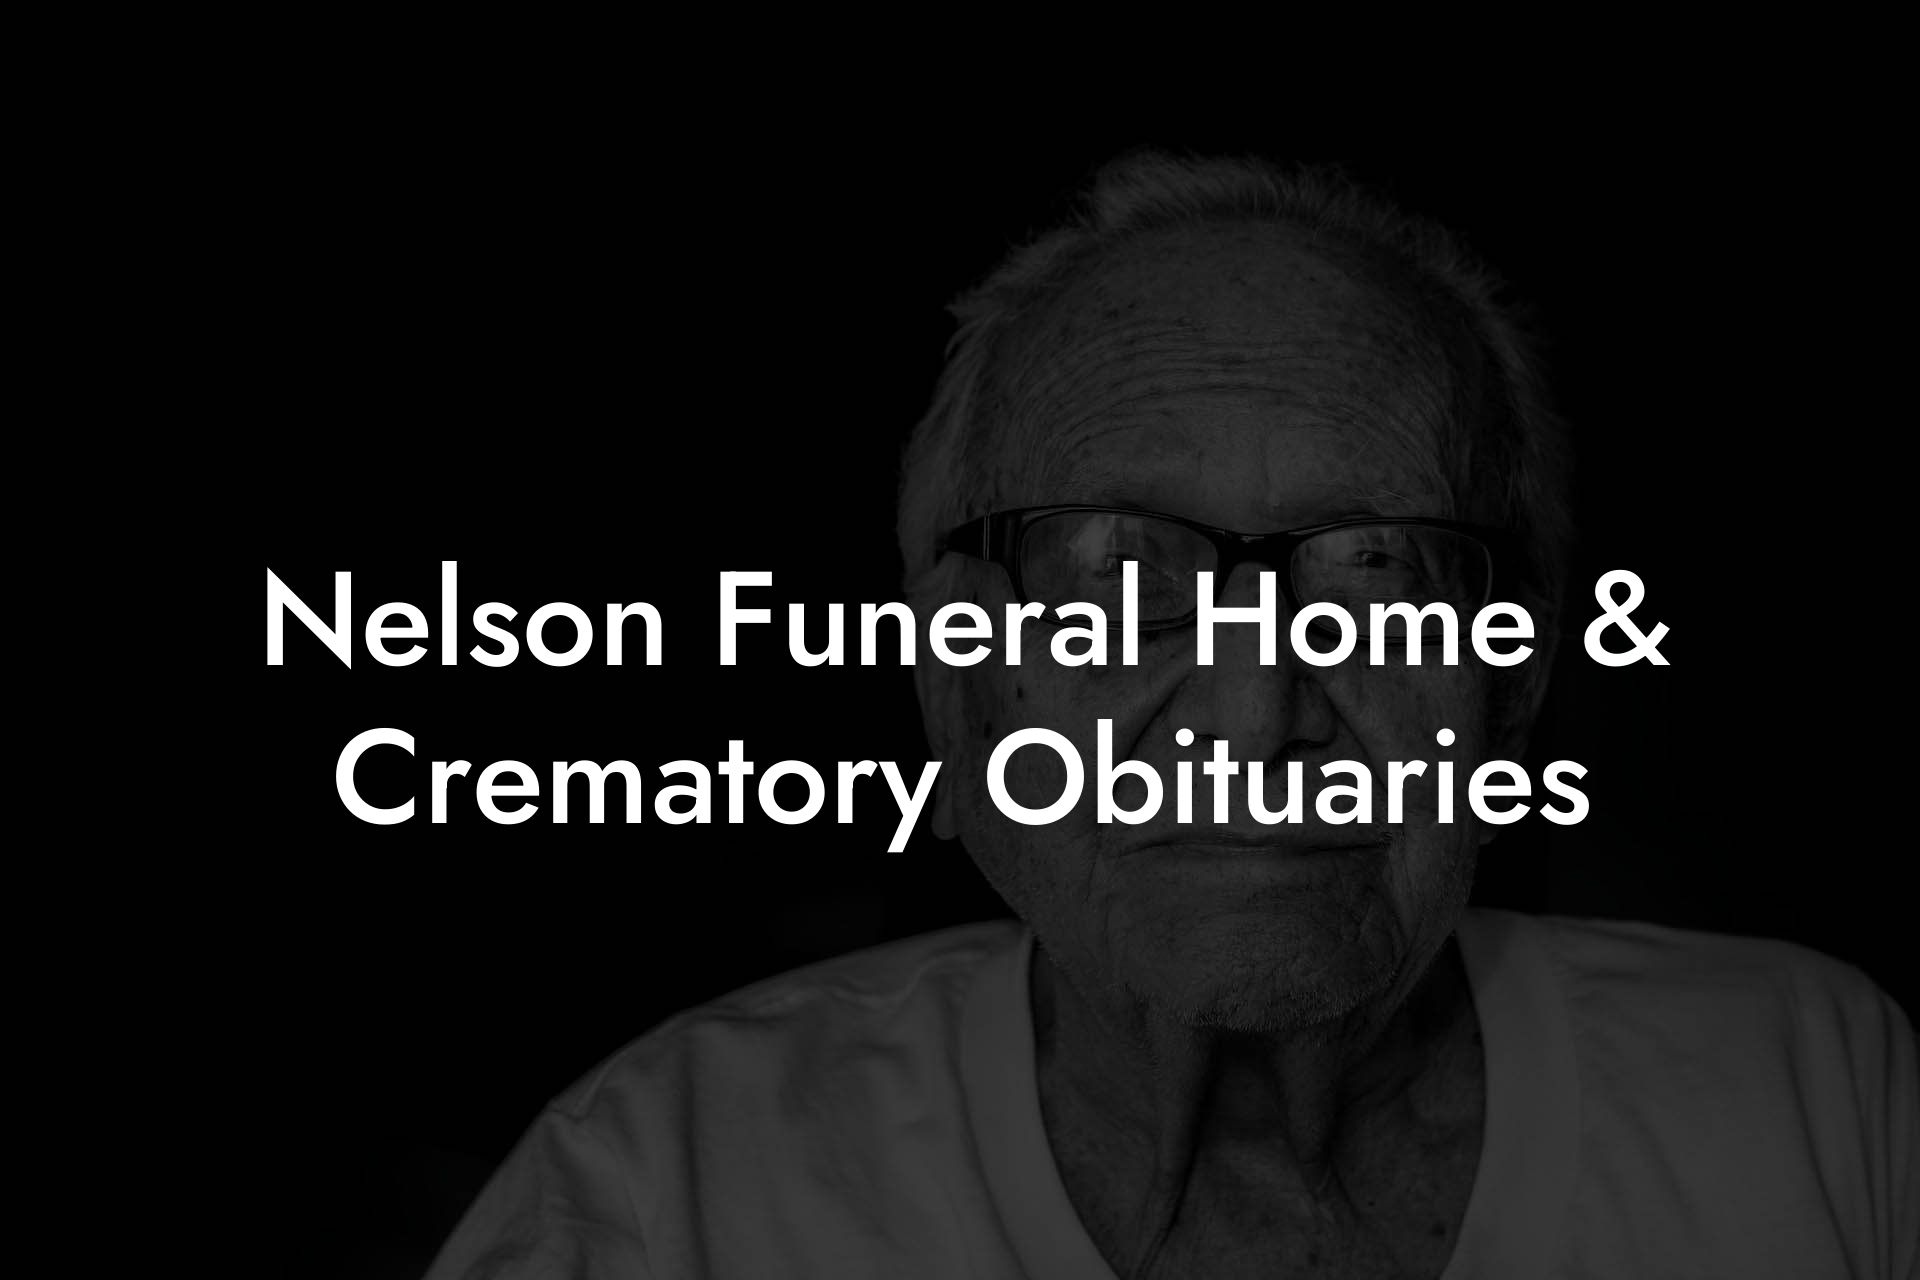 Nelson Funeral Home & Crematory Obituaries